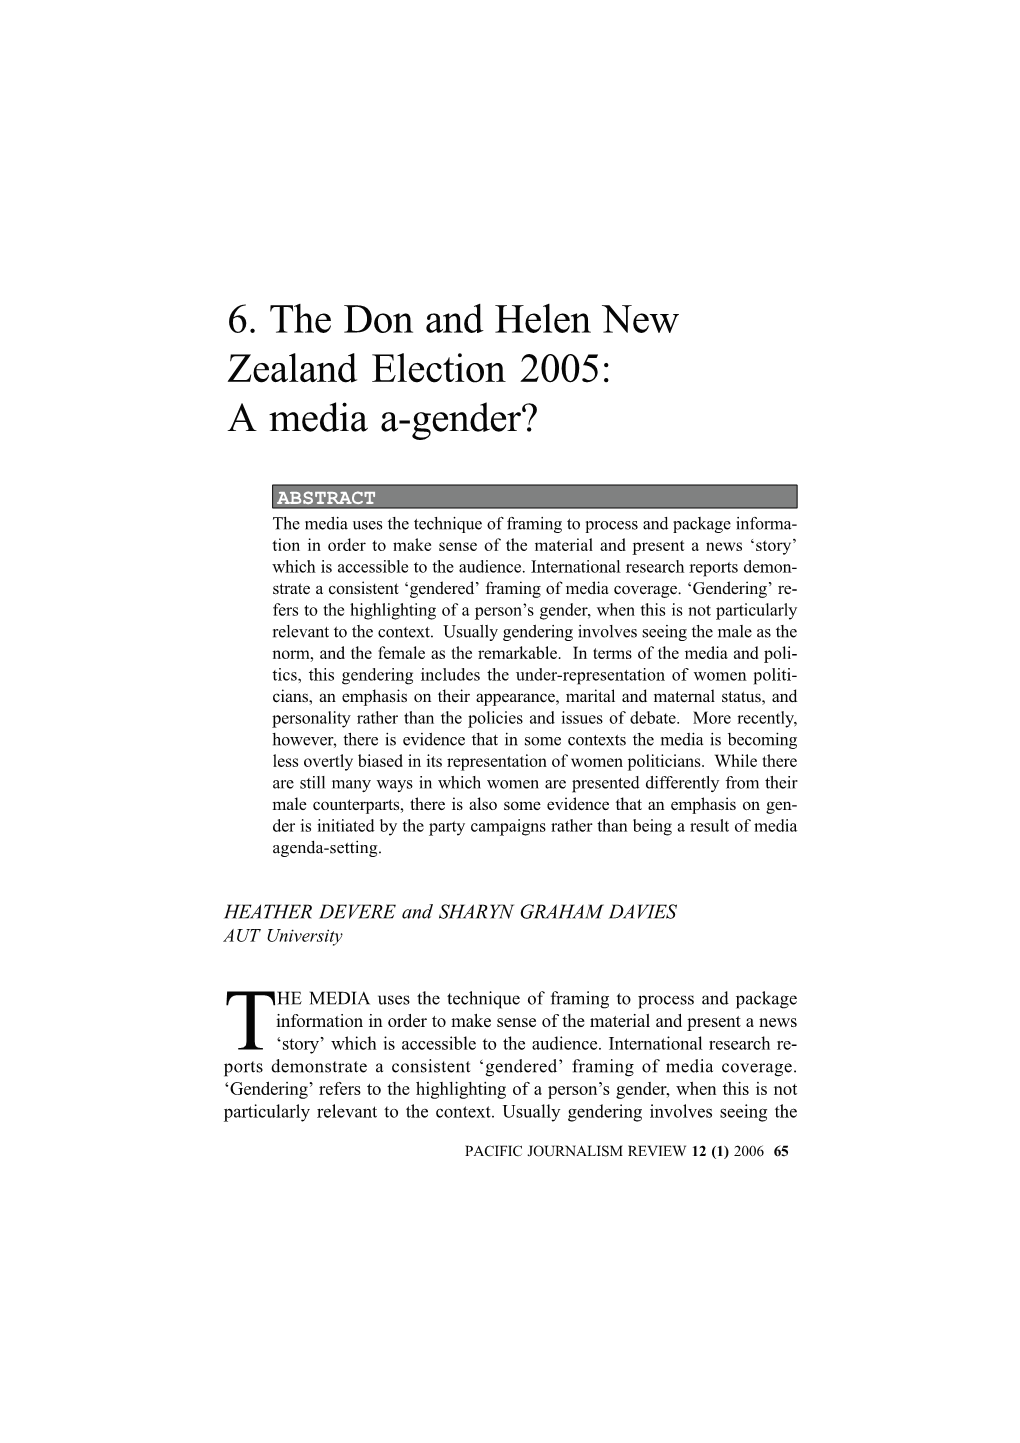 6. the Don and Helen New Zealand Election 2005: a Media A-Gender?